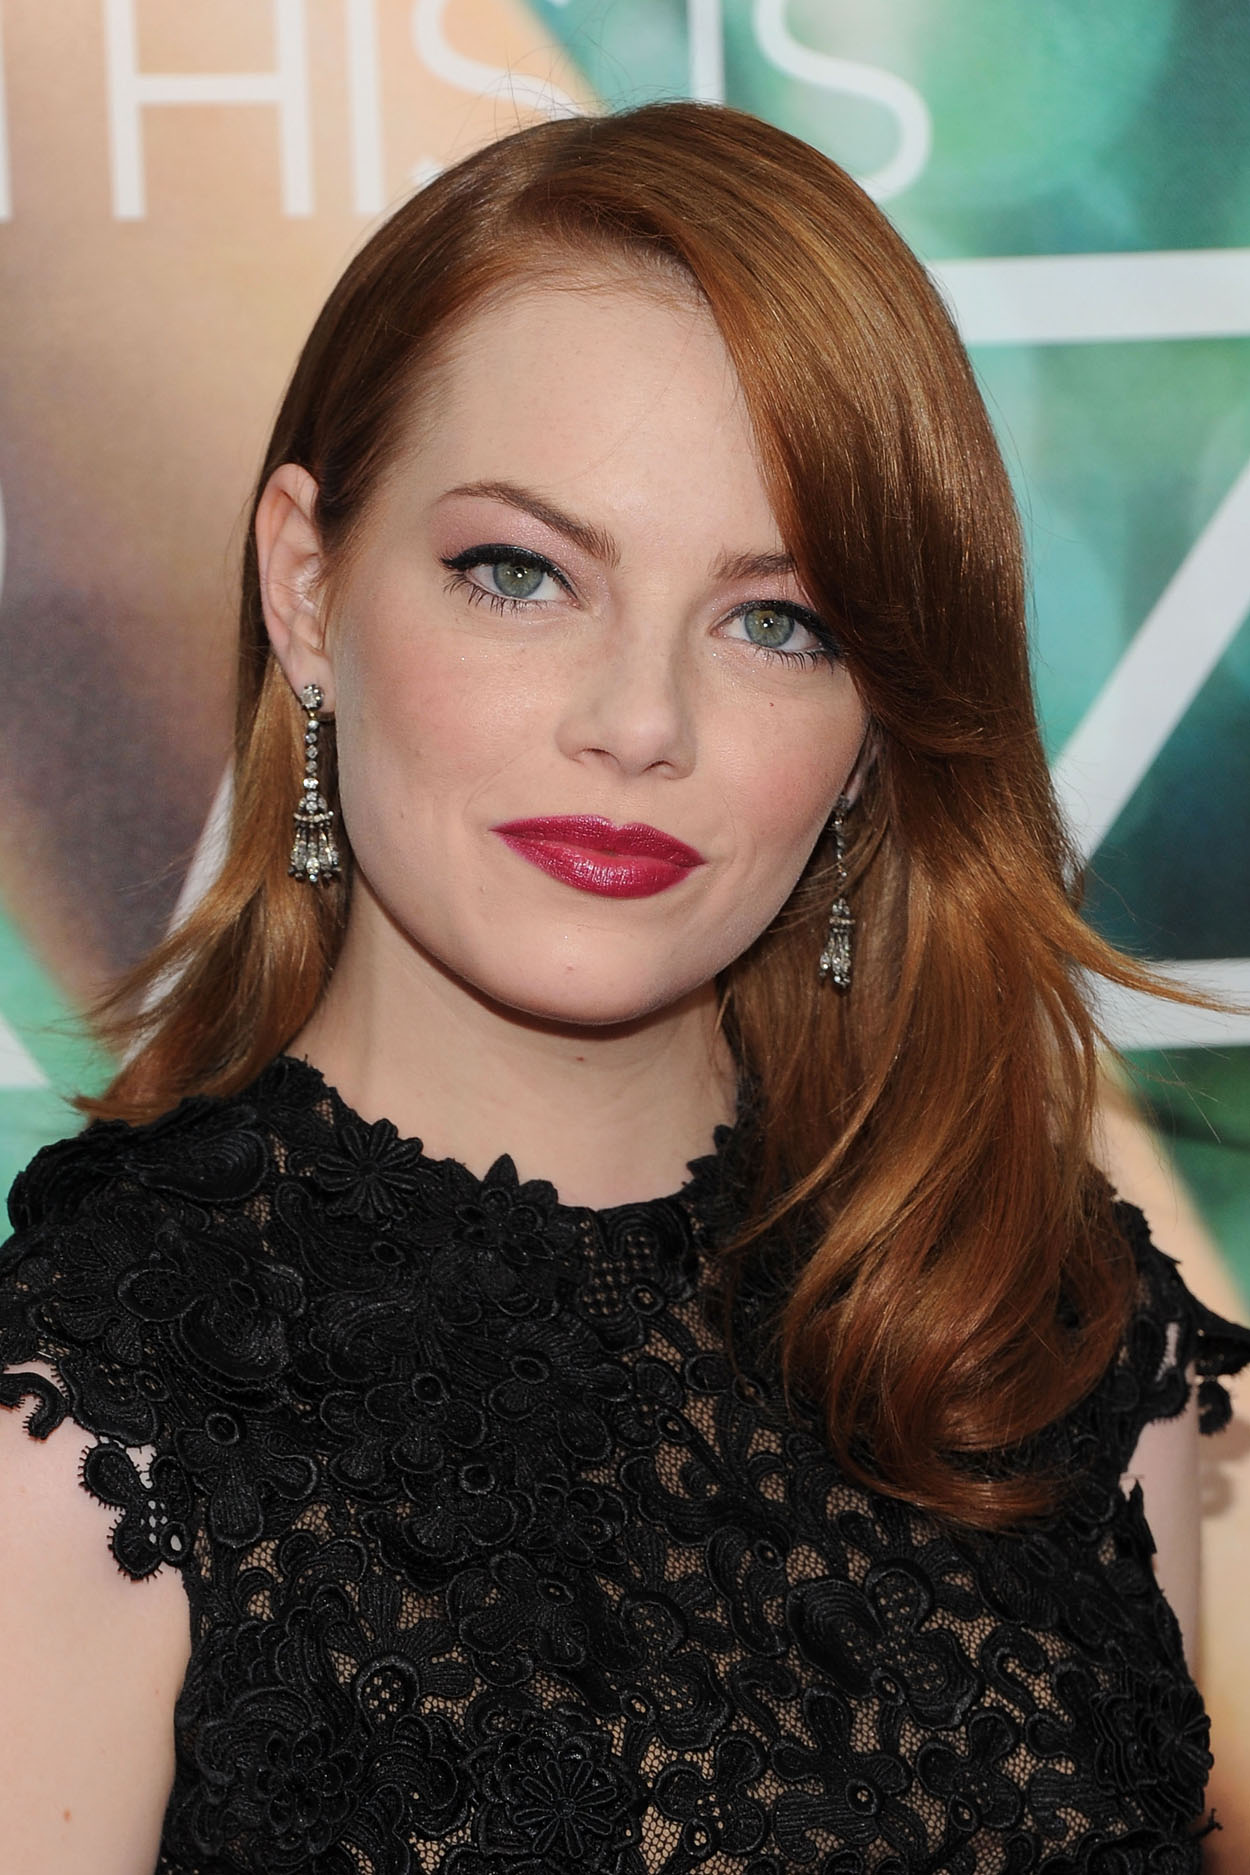 Emma Stone at the New York premiere of the movie Crazy, Stupid, Love at the Ziegfeld Theatre on 19th July 2011